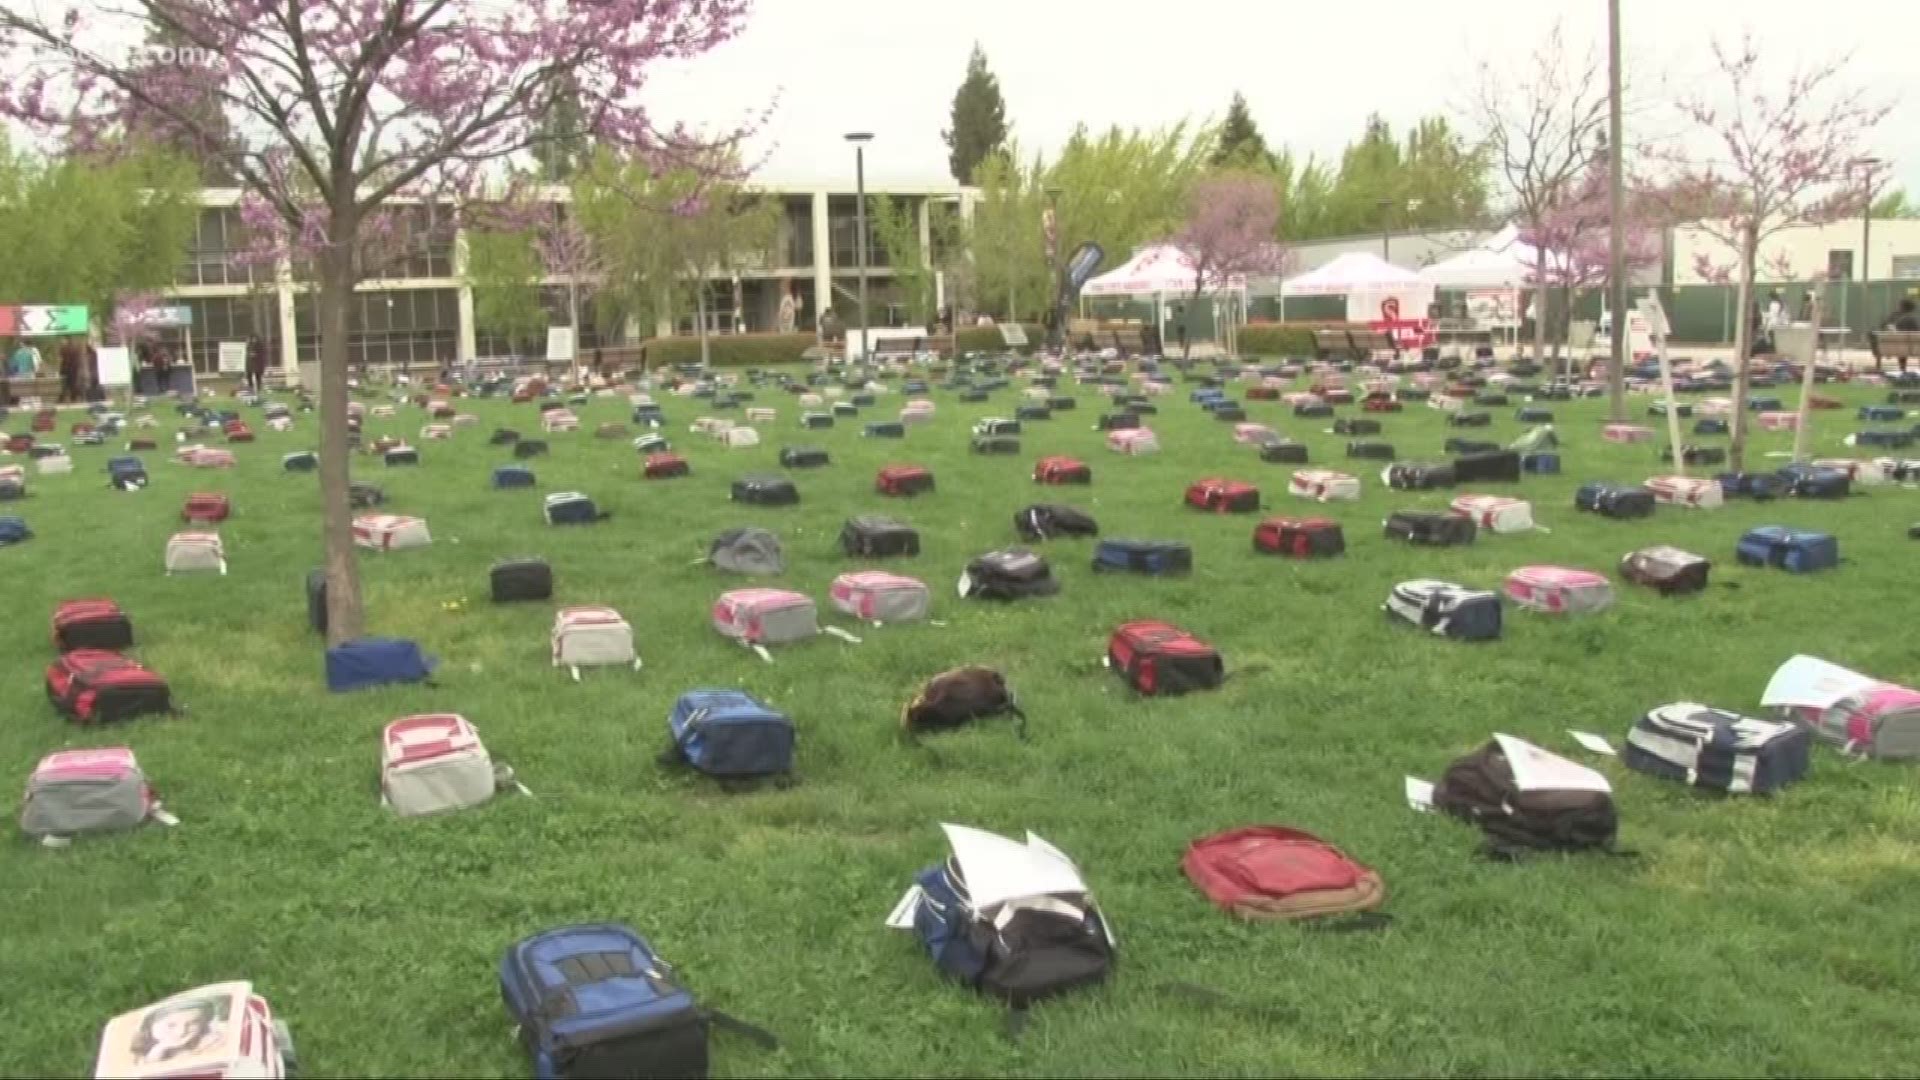 This traveling exhibit, called Send Silence Packing, visits college campuses across the country and it's meant to bring awareness to mental illness and suicide prevention.